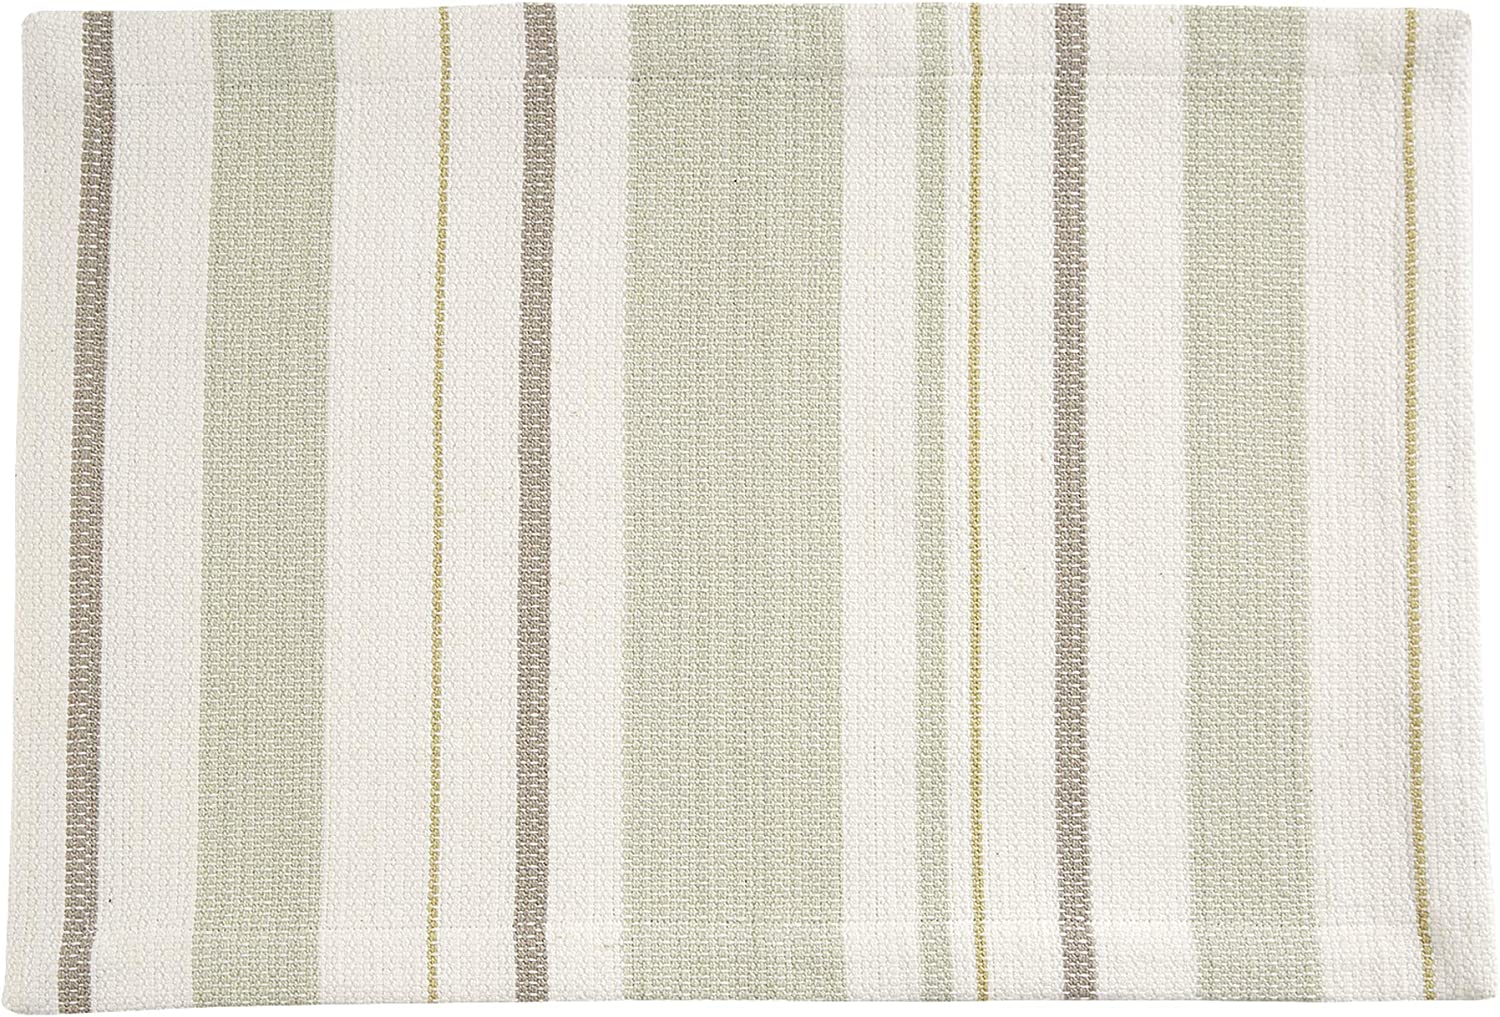 Park Design Patience Stripe Table Runner 15 x 72 Inches Stripe